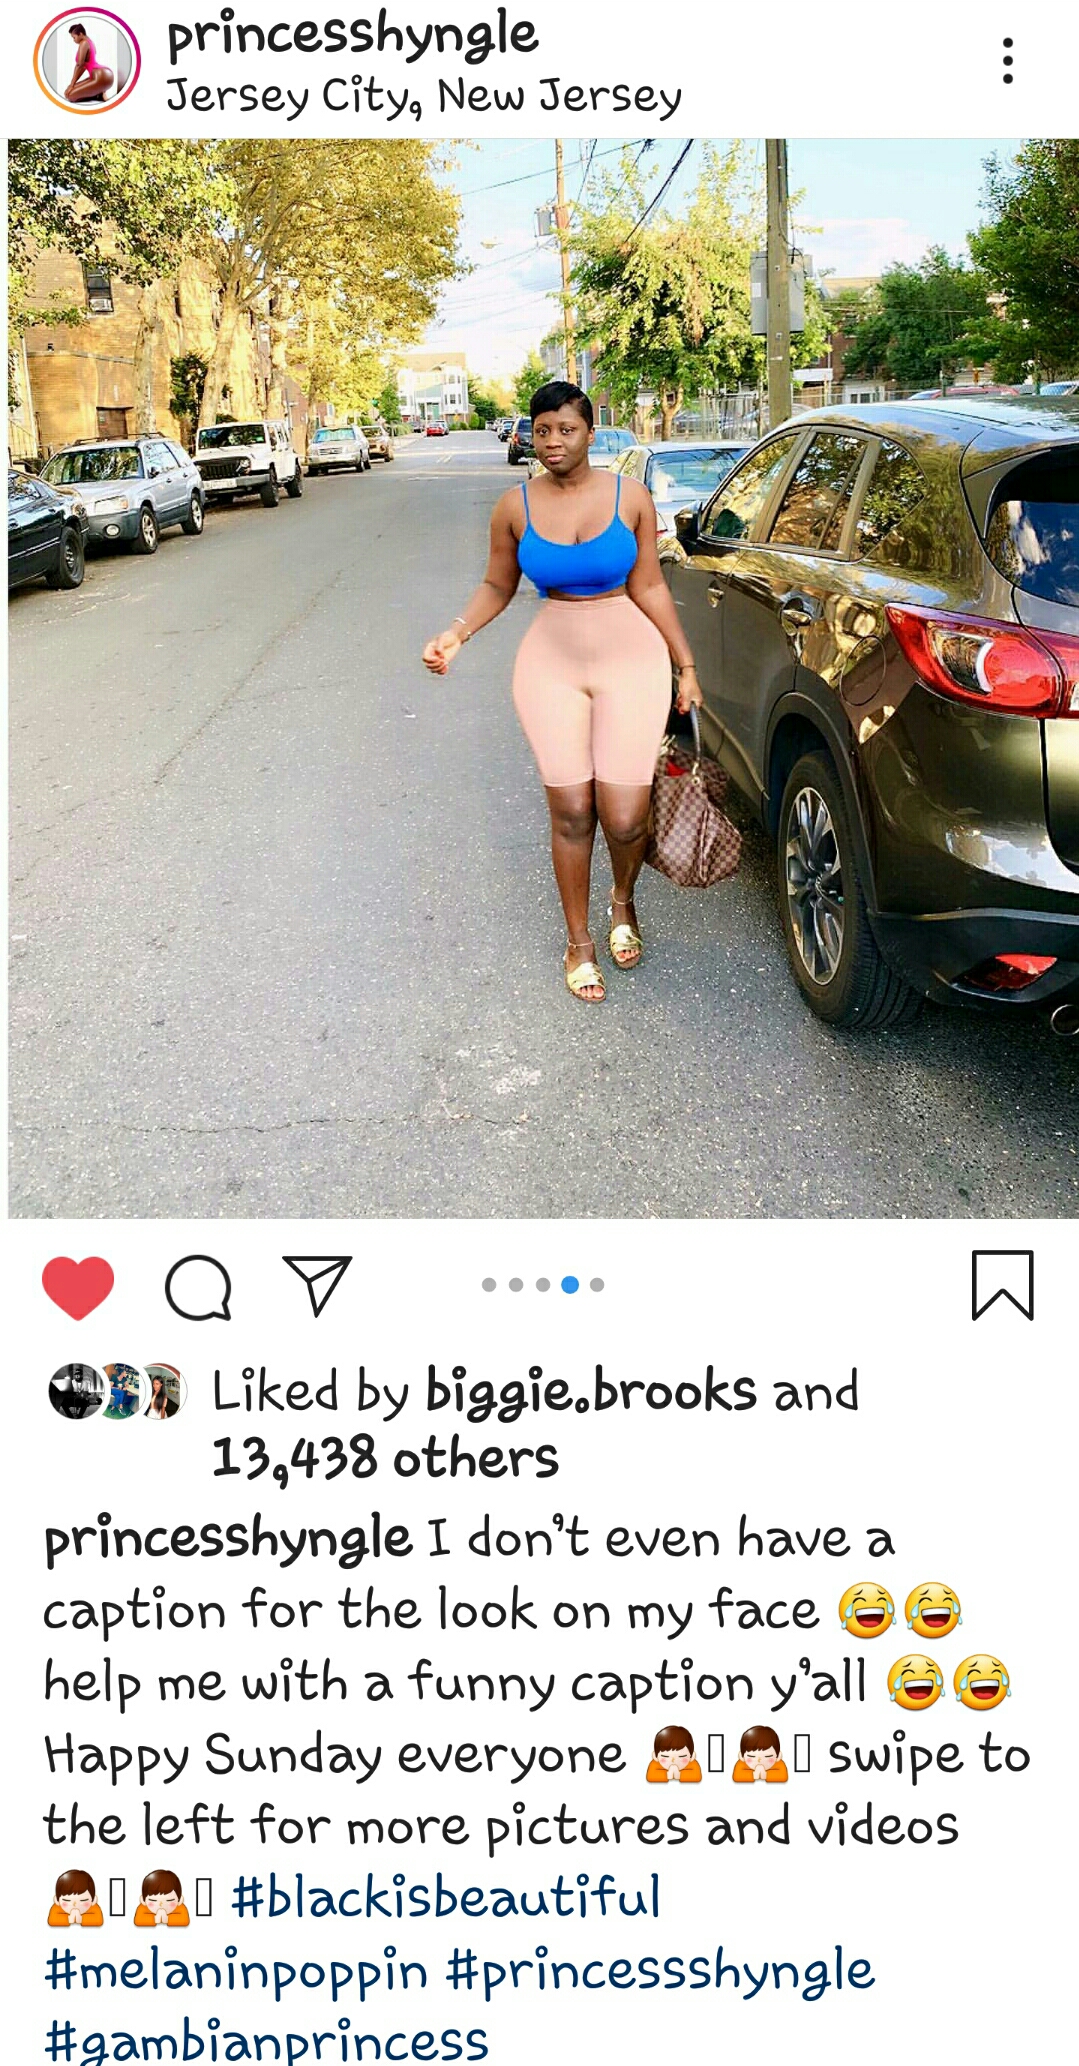 Princess Shyngle drops jaw dropping pictures to set the internet ablaze